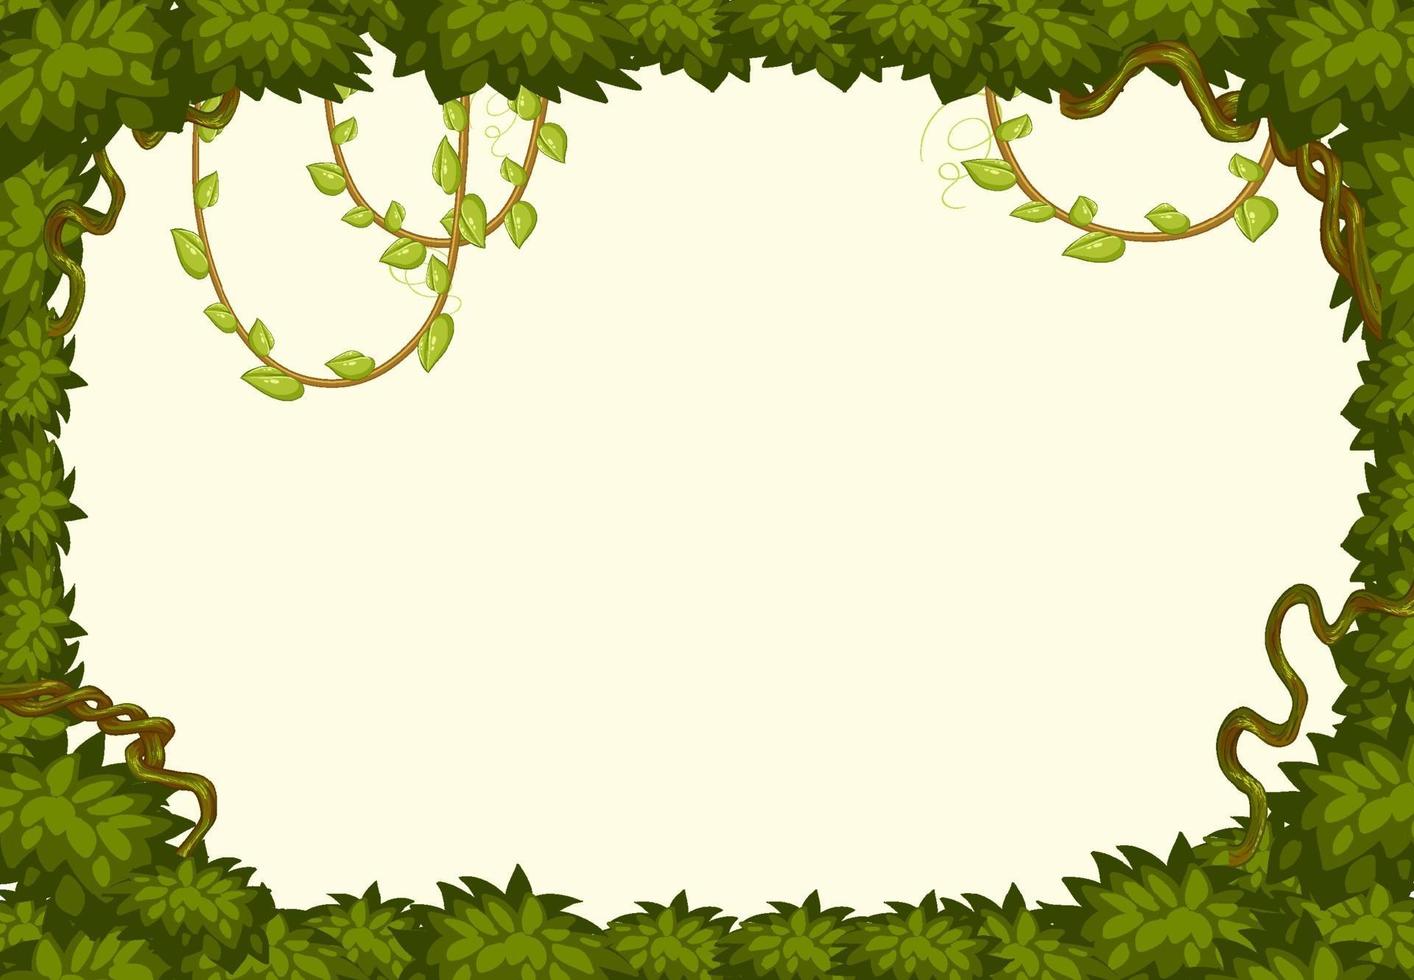 Empty background with jungle tree elements vector